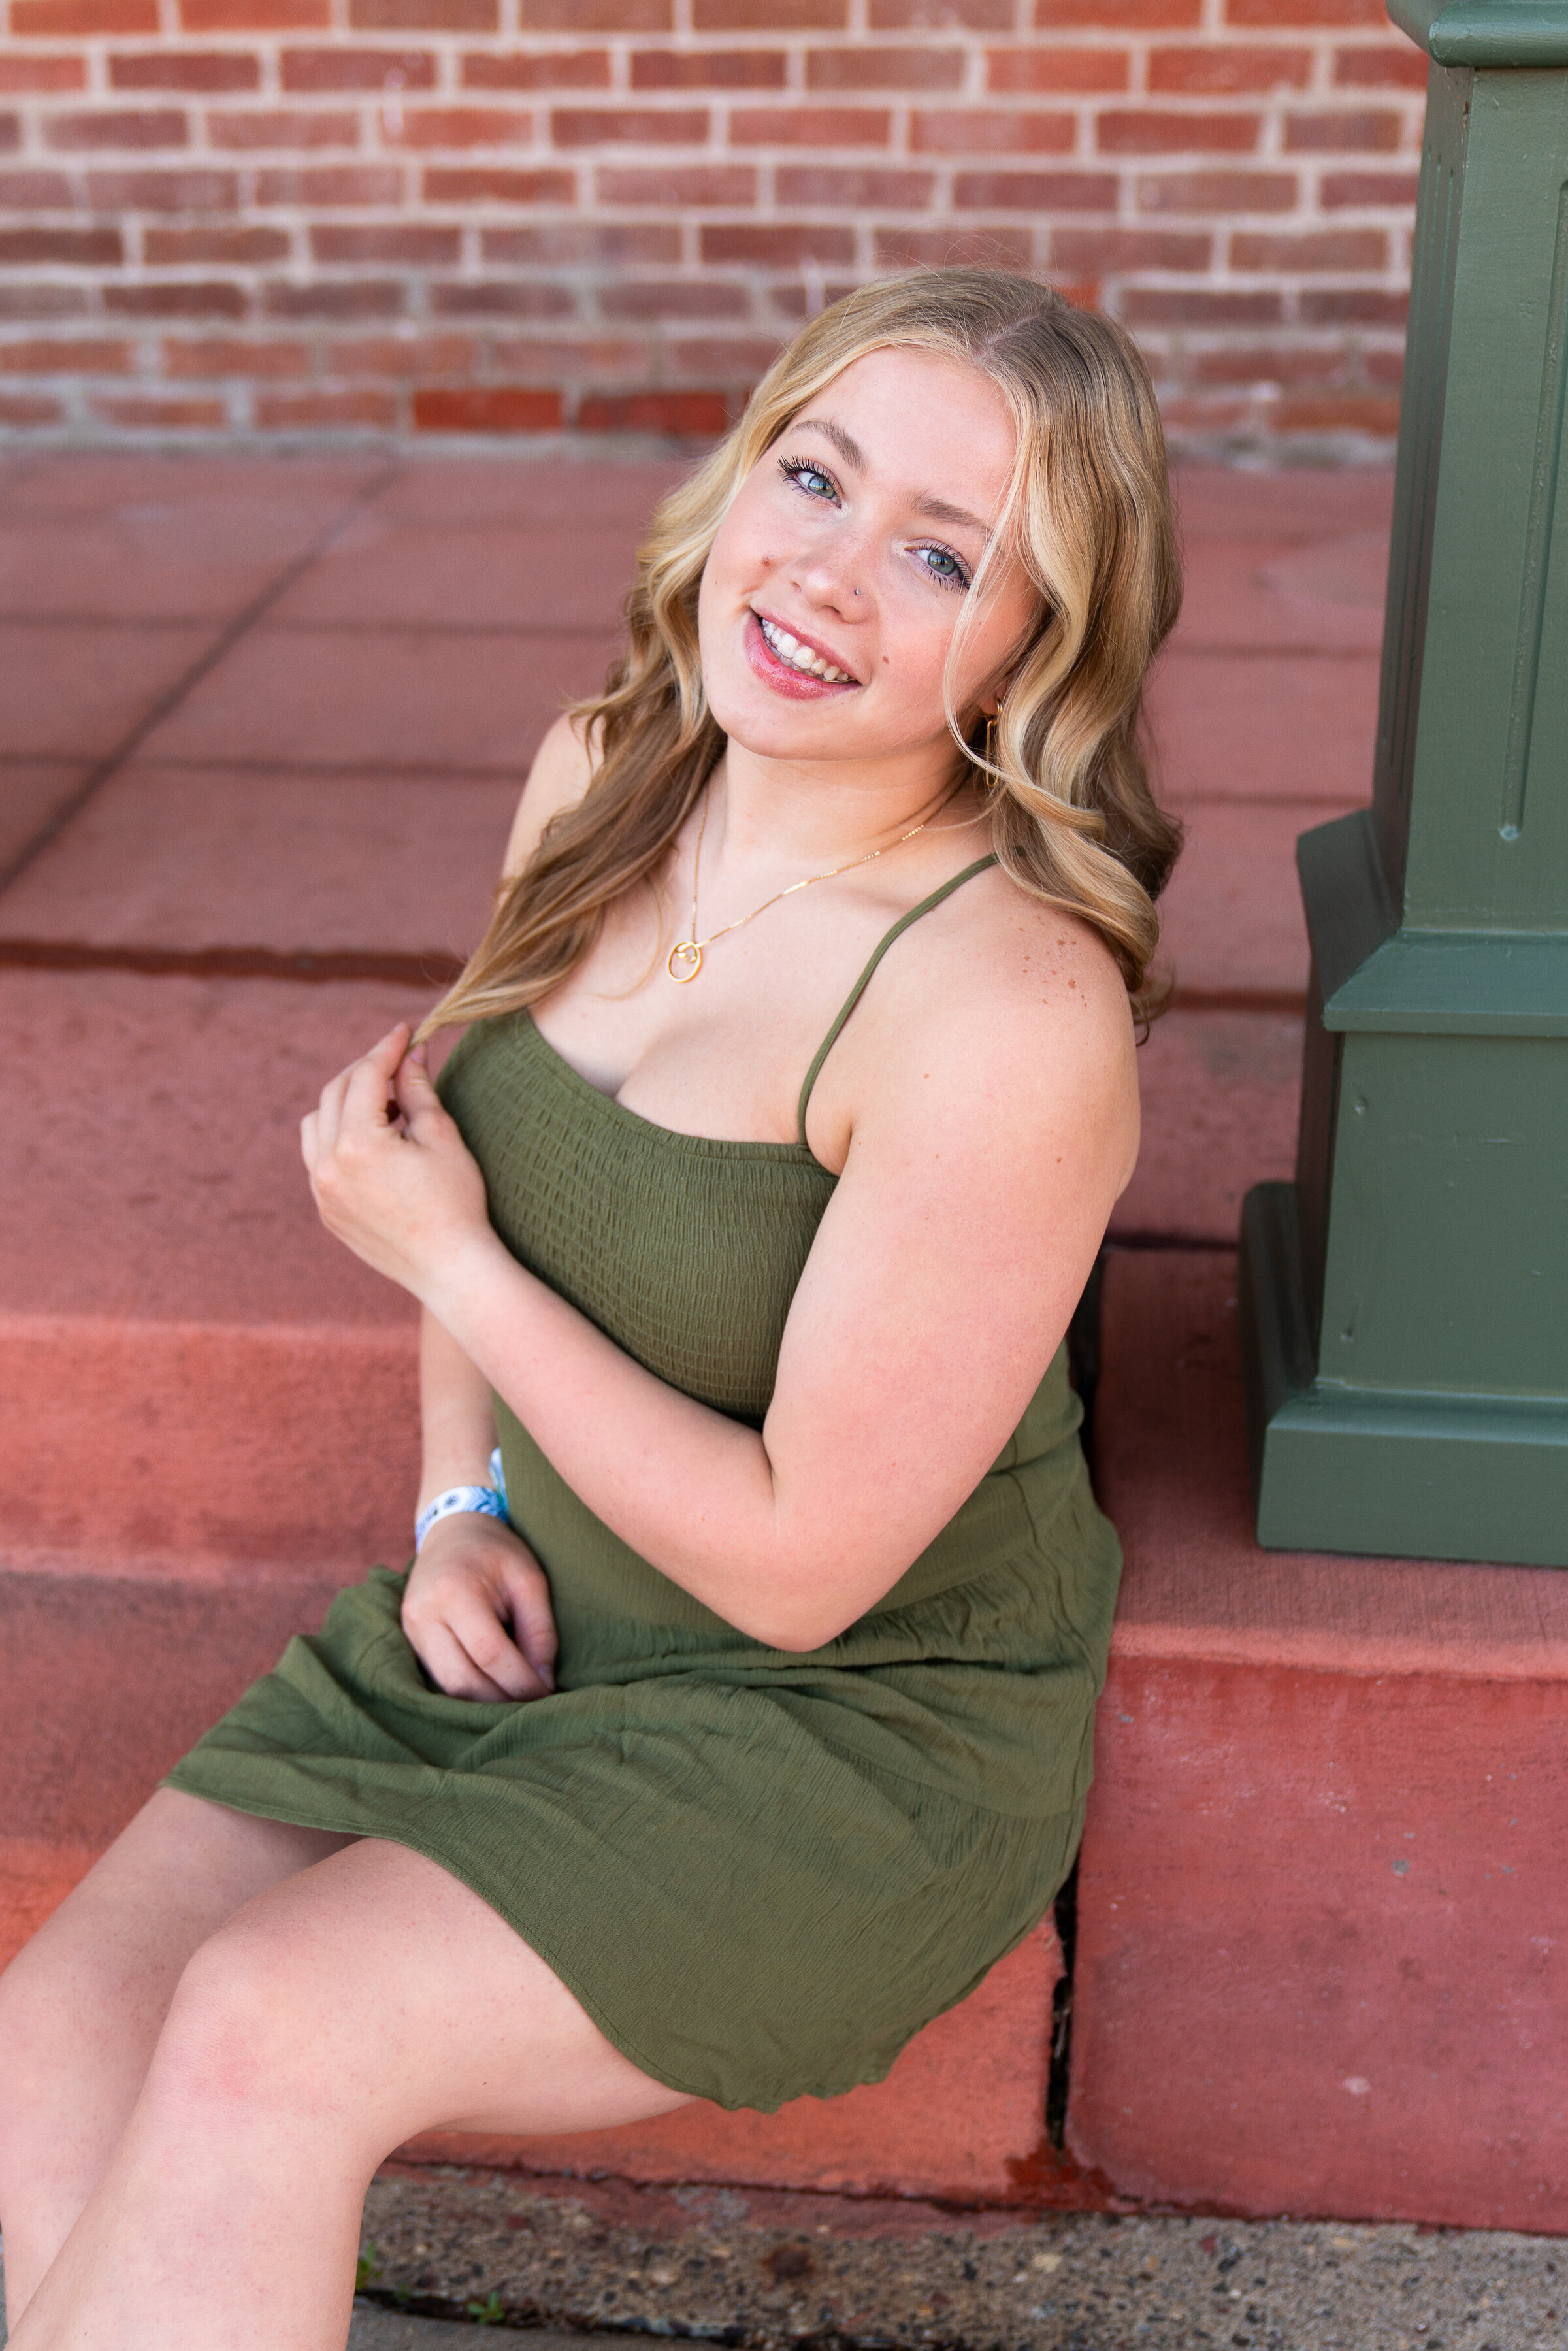 Who takes senior photos near me - Kristen Elizabeth Photography - how much for senior pictures